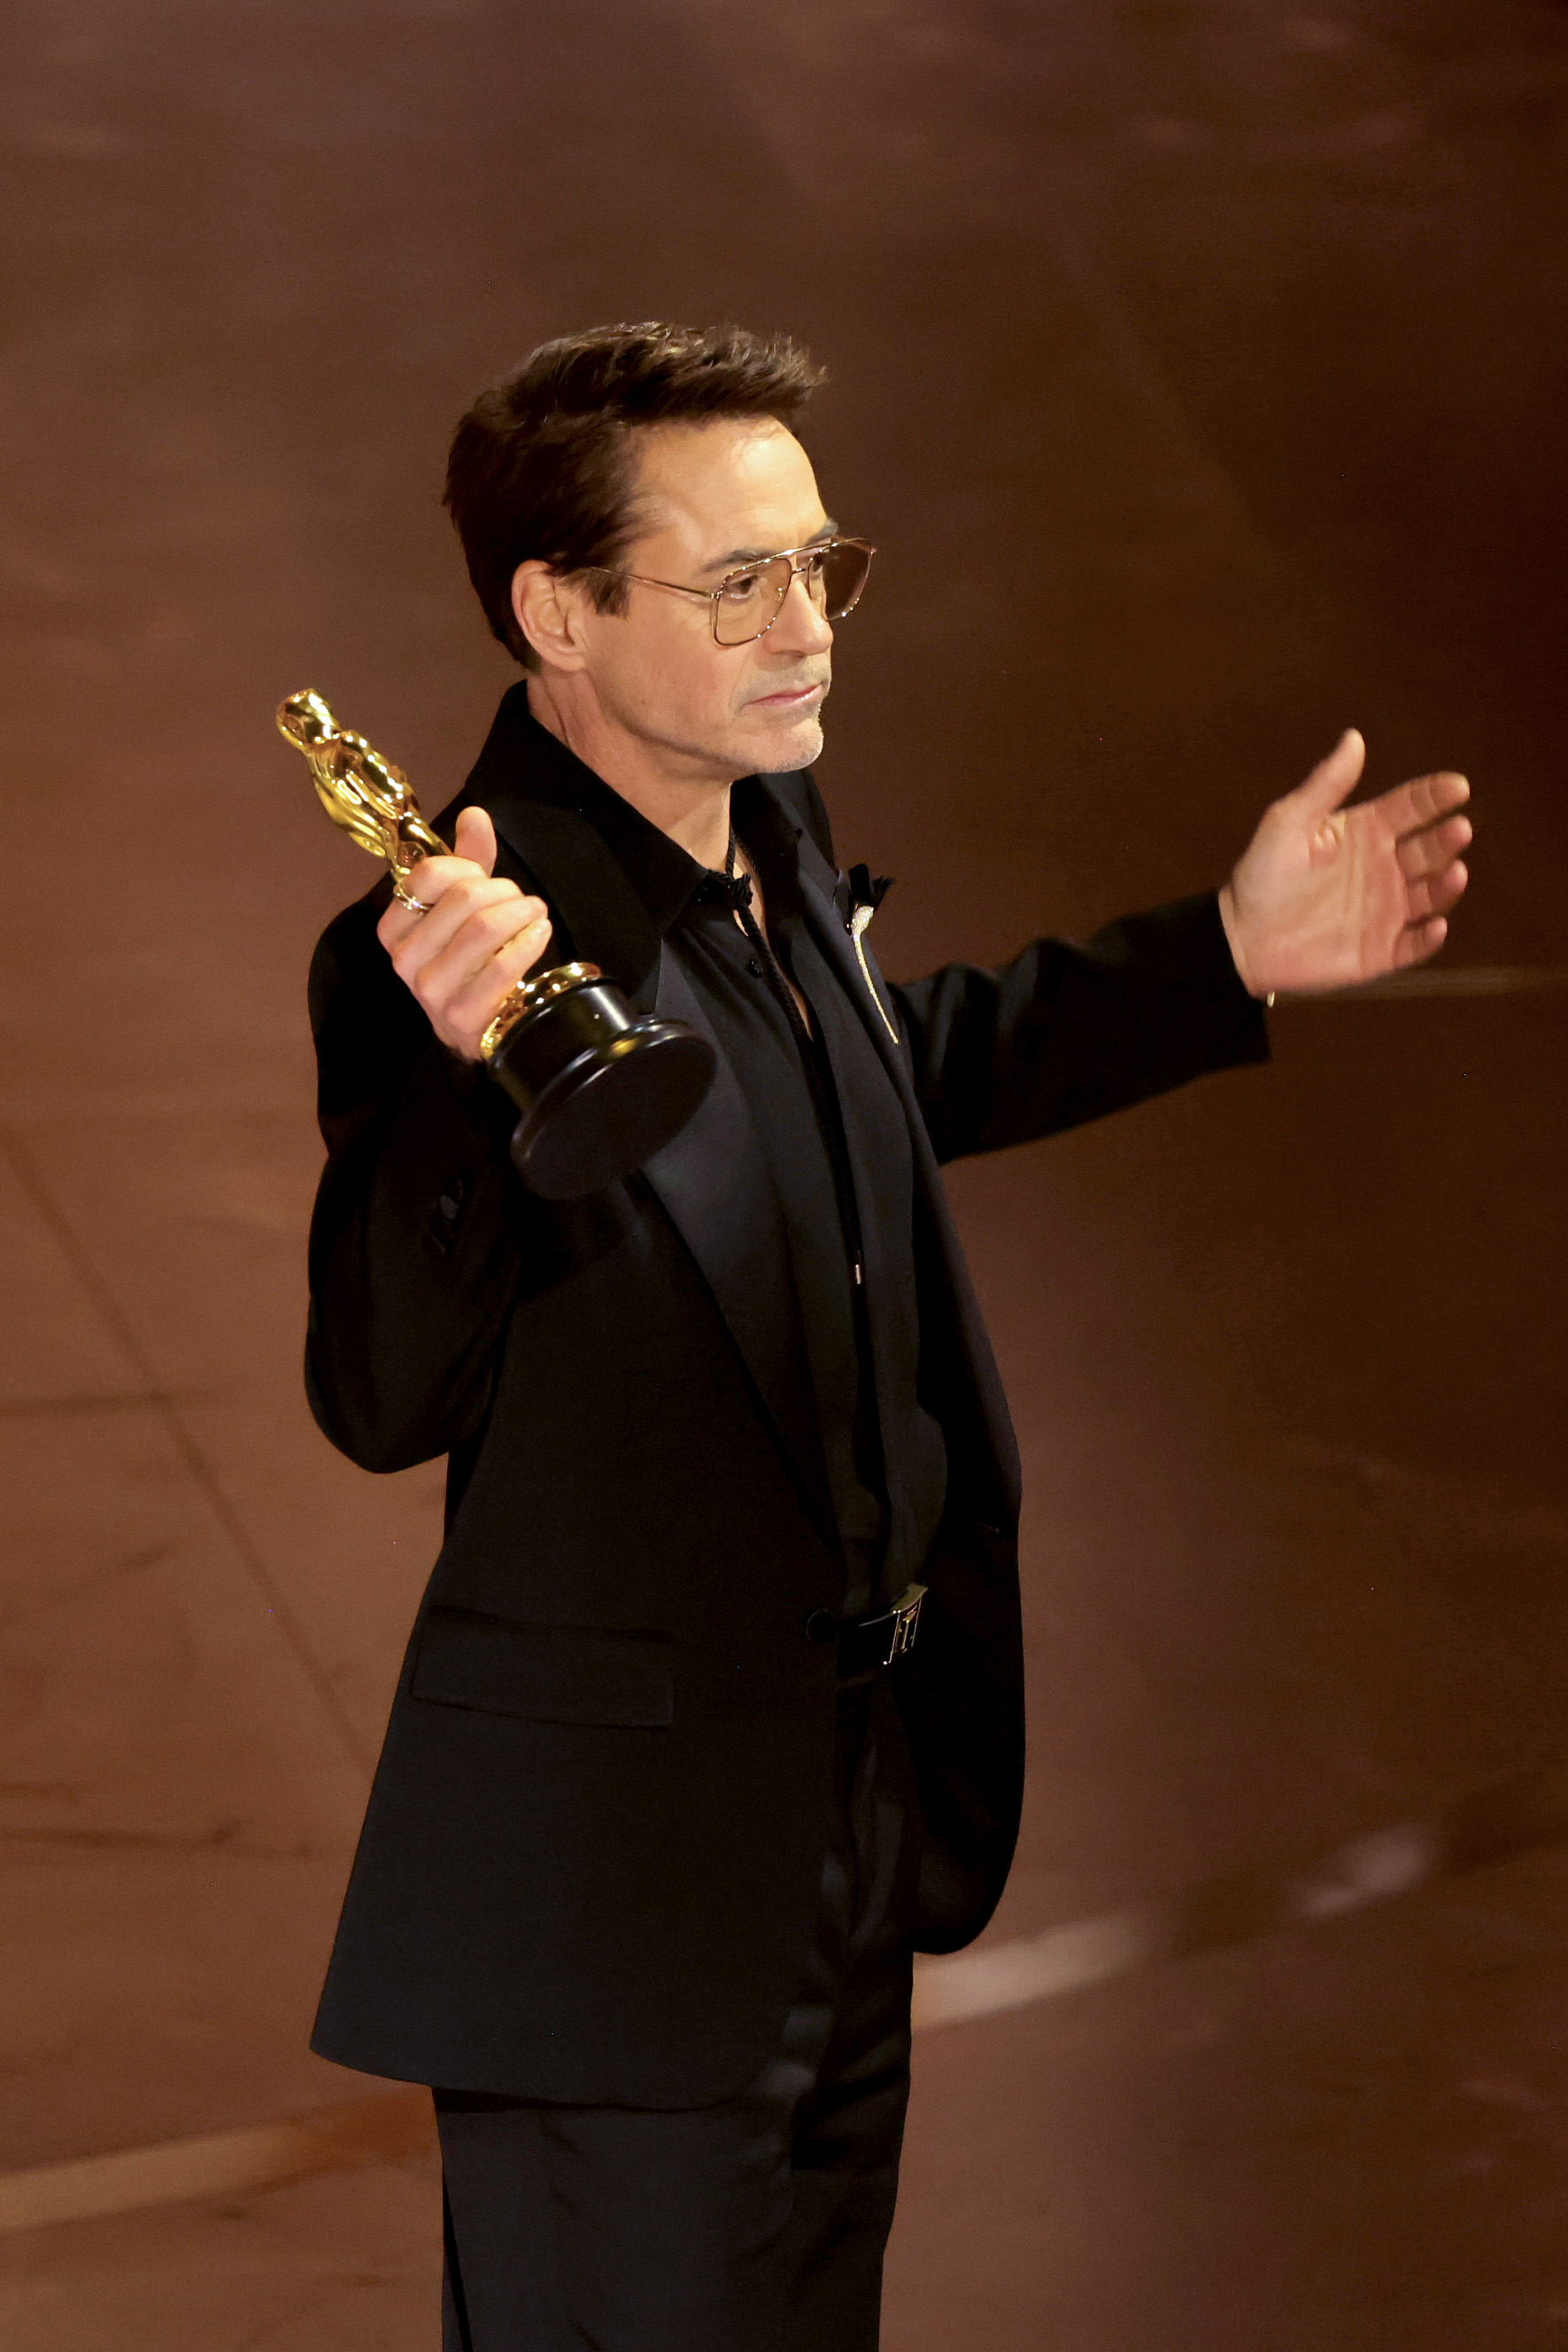 Robert Downey Jr. as he received his Best Supporting Actor award for the film "Oppenheimer" at the 96th Annual Academy Awards in Hollywood, California, on March 10, 2024 | Source: Getty Images